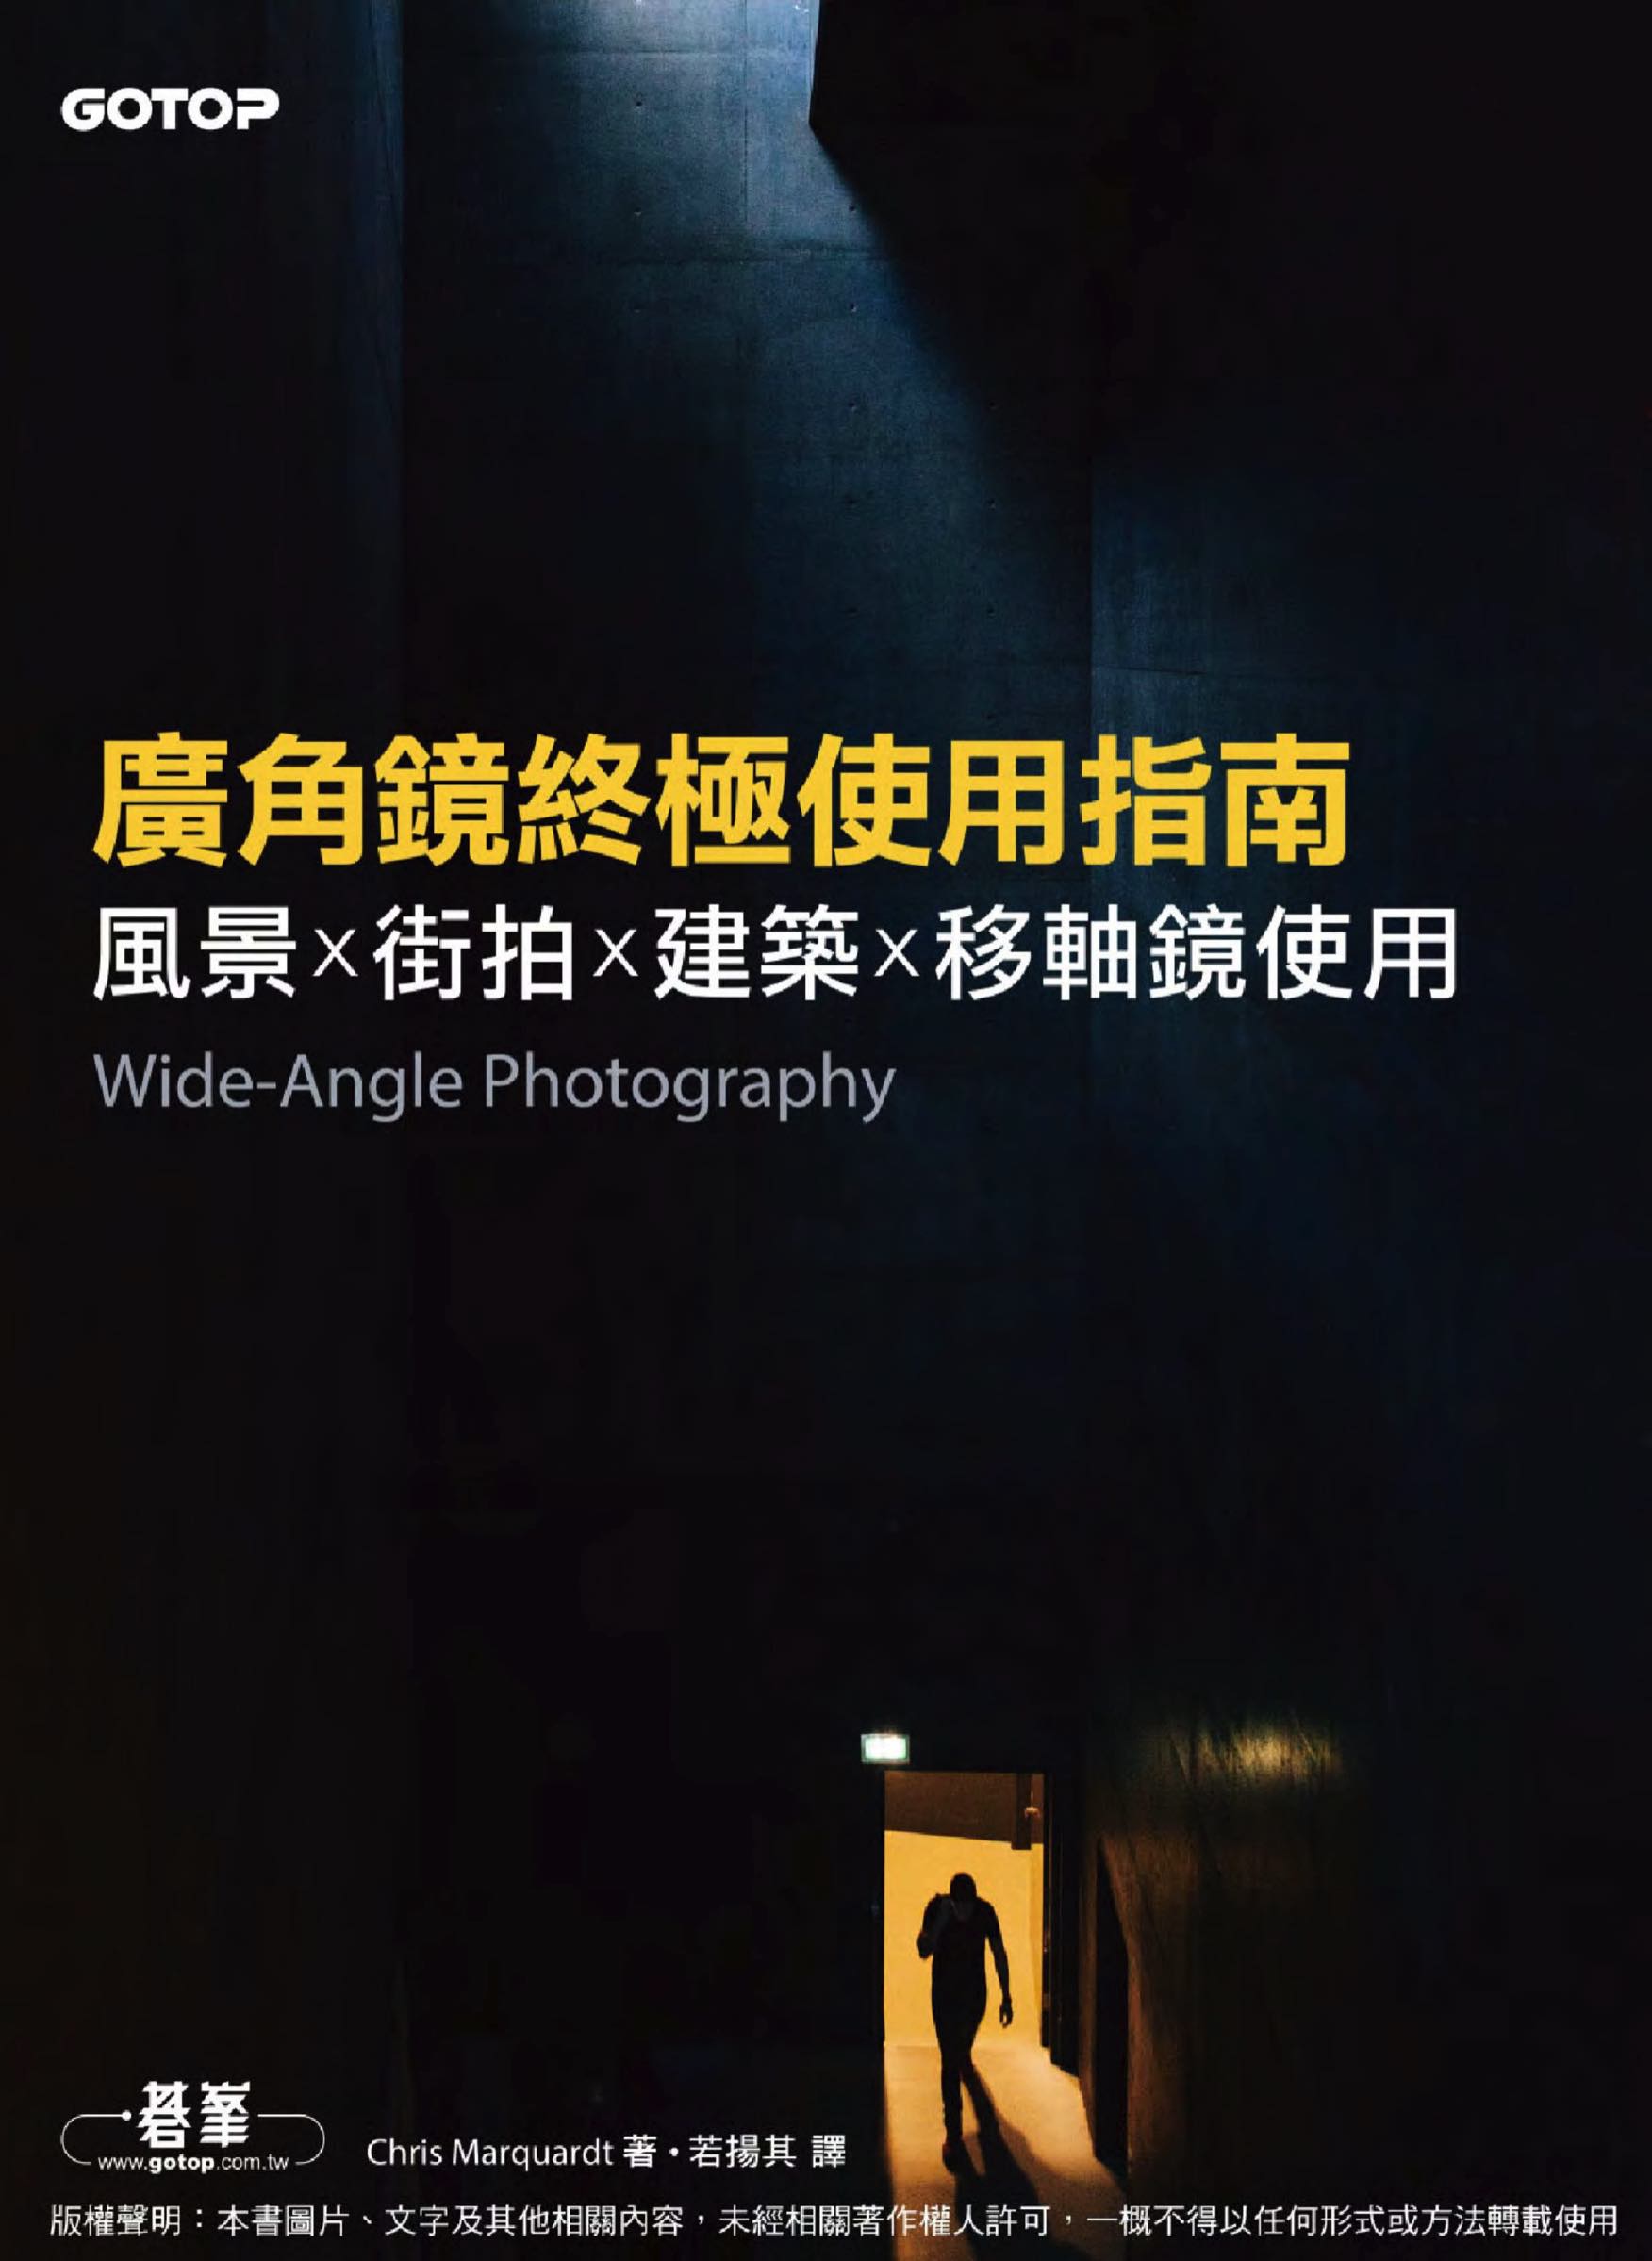 Book cover of 廣角鏡終極使用指南｜風景x街拍x建築x移軸鏡使用 (Chinese version of Wide-Angle Photography)